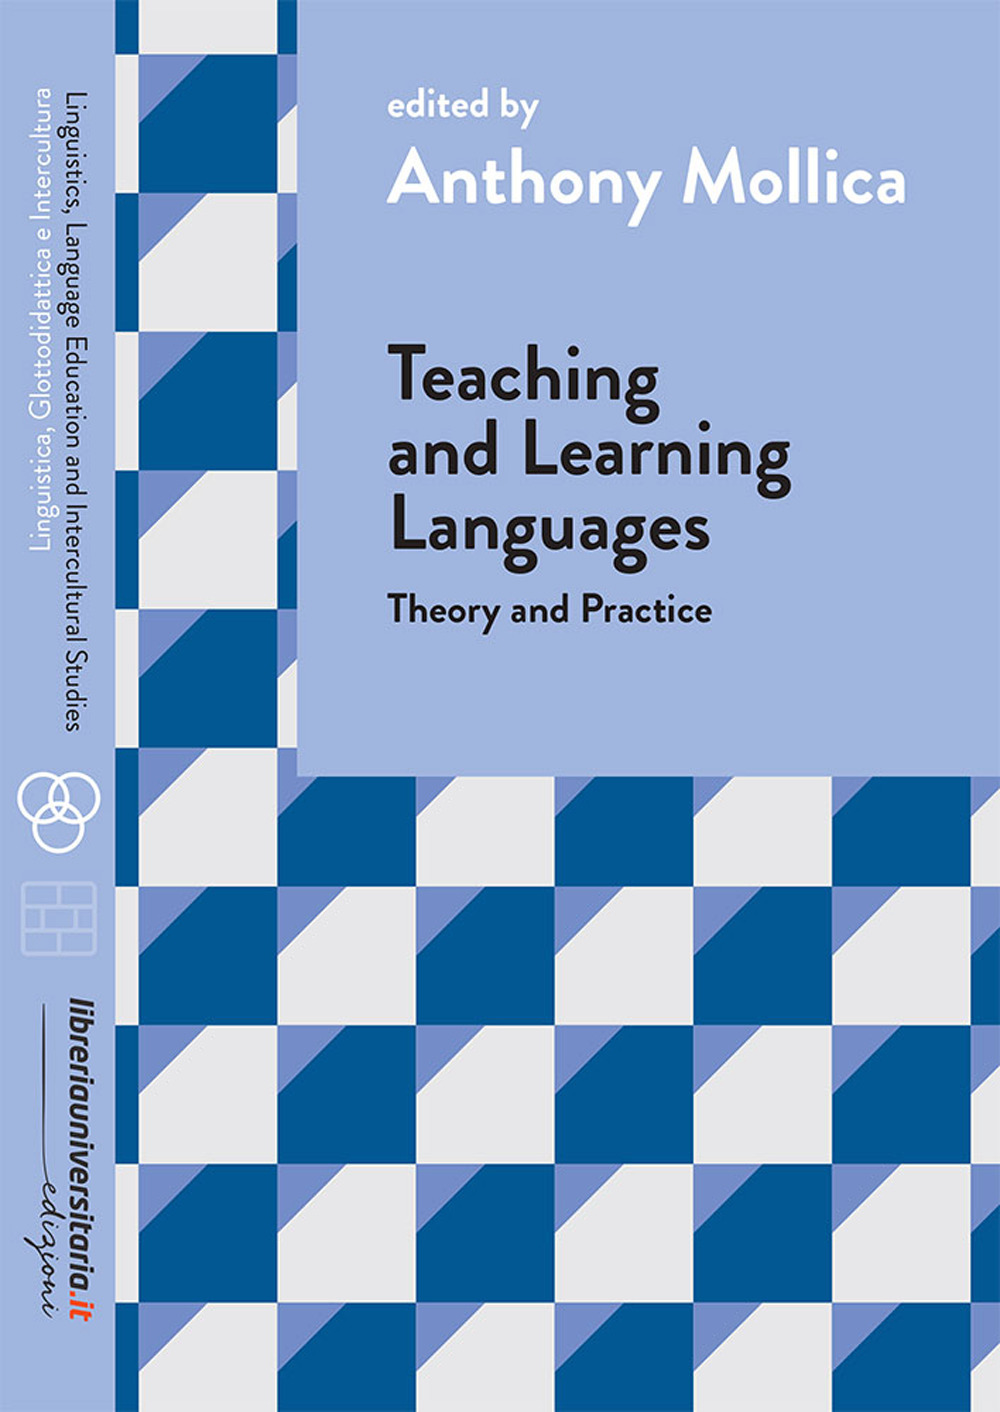 Teaching and Learning Languages. Theory and Practice